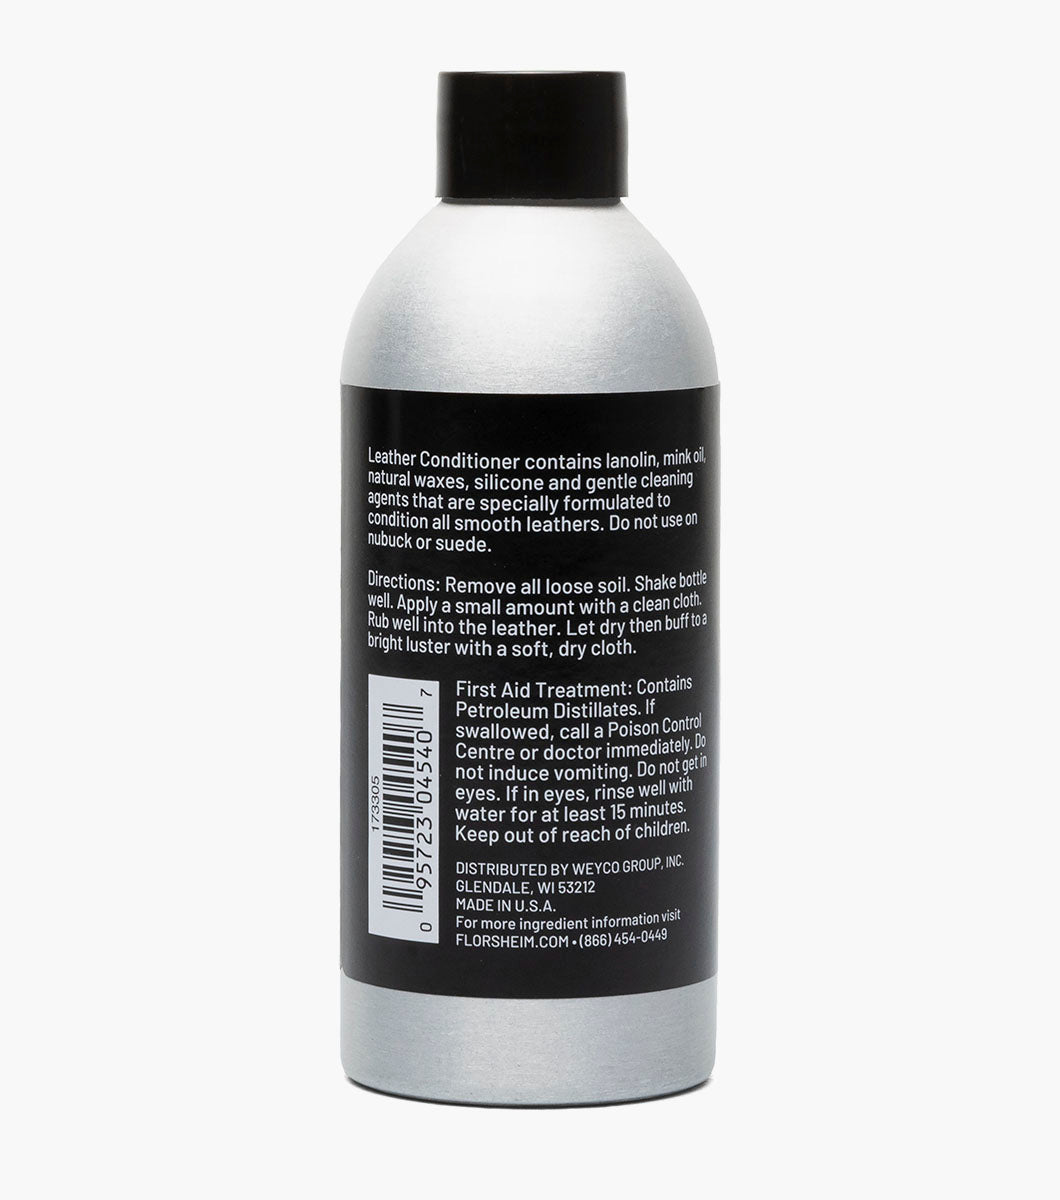 LEATHER CONDITIONER Clean + Protect